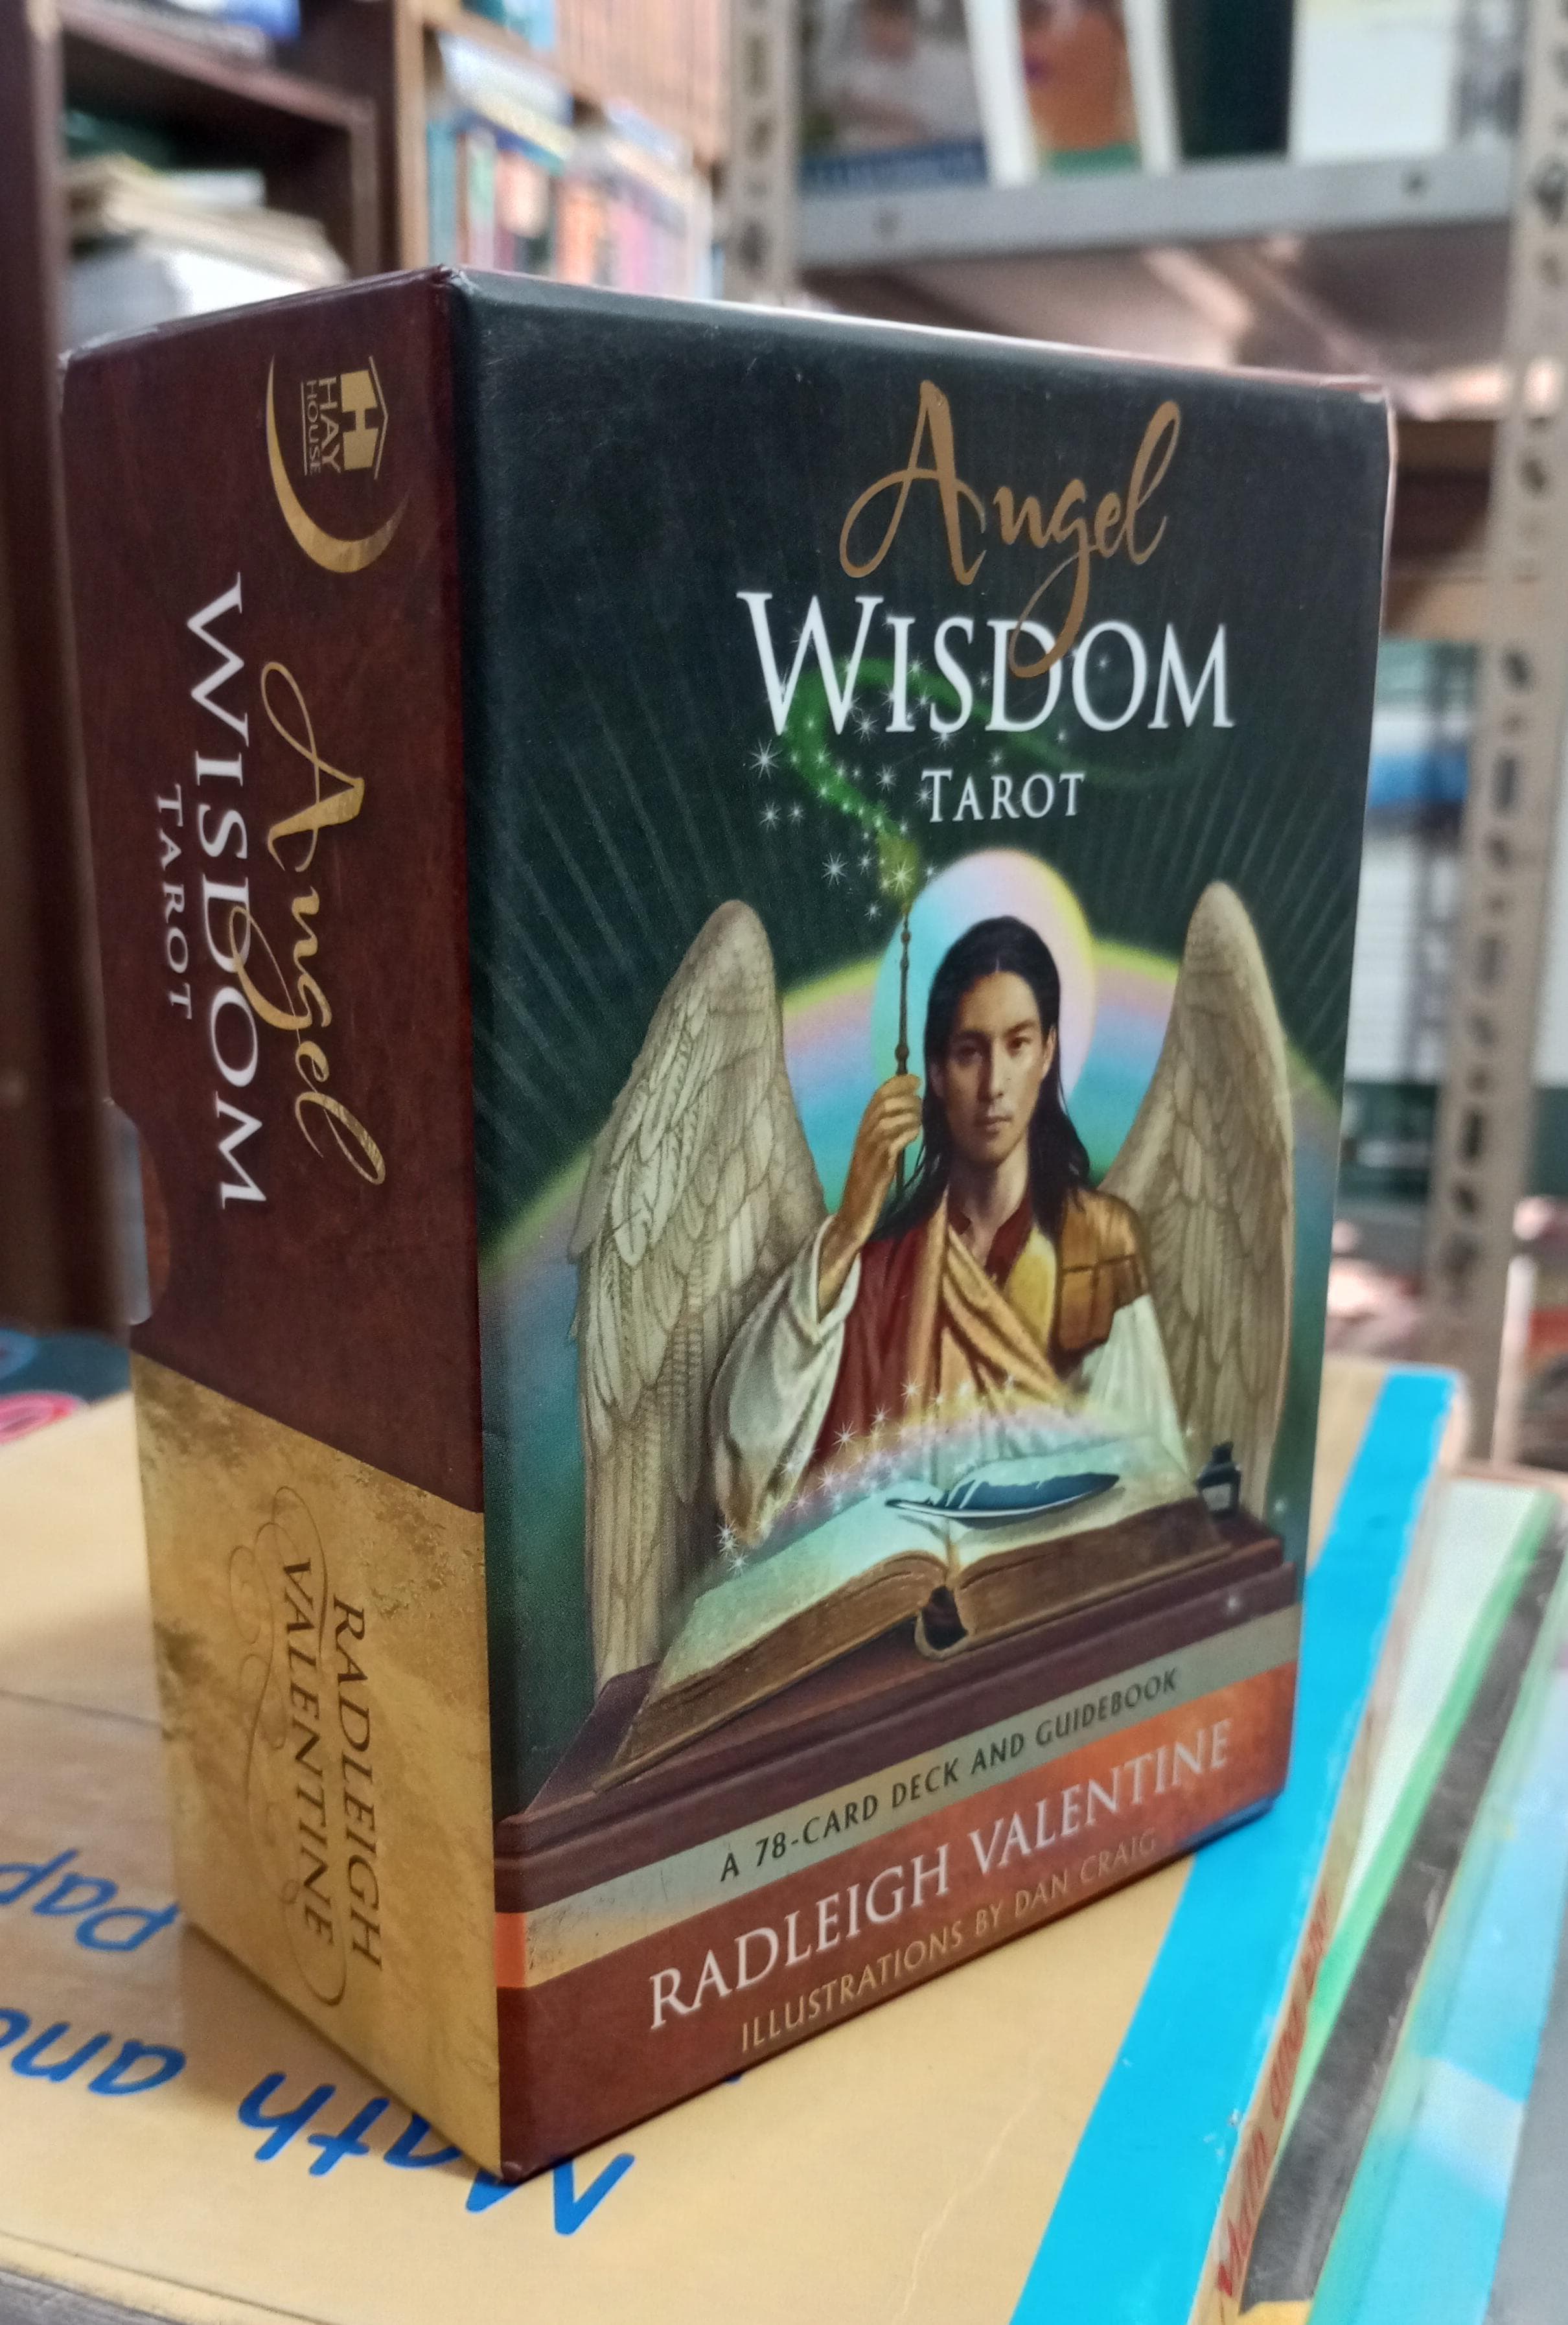 angel wisdom tarot a 78 card deck and guide book by radleigh valentine